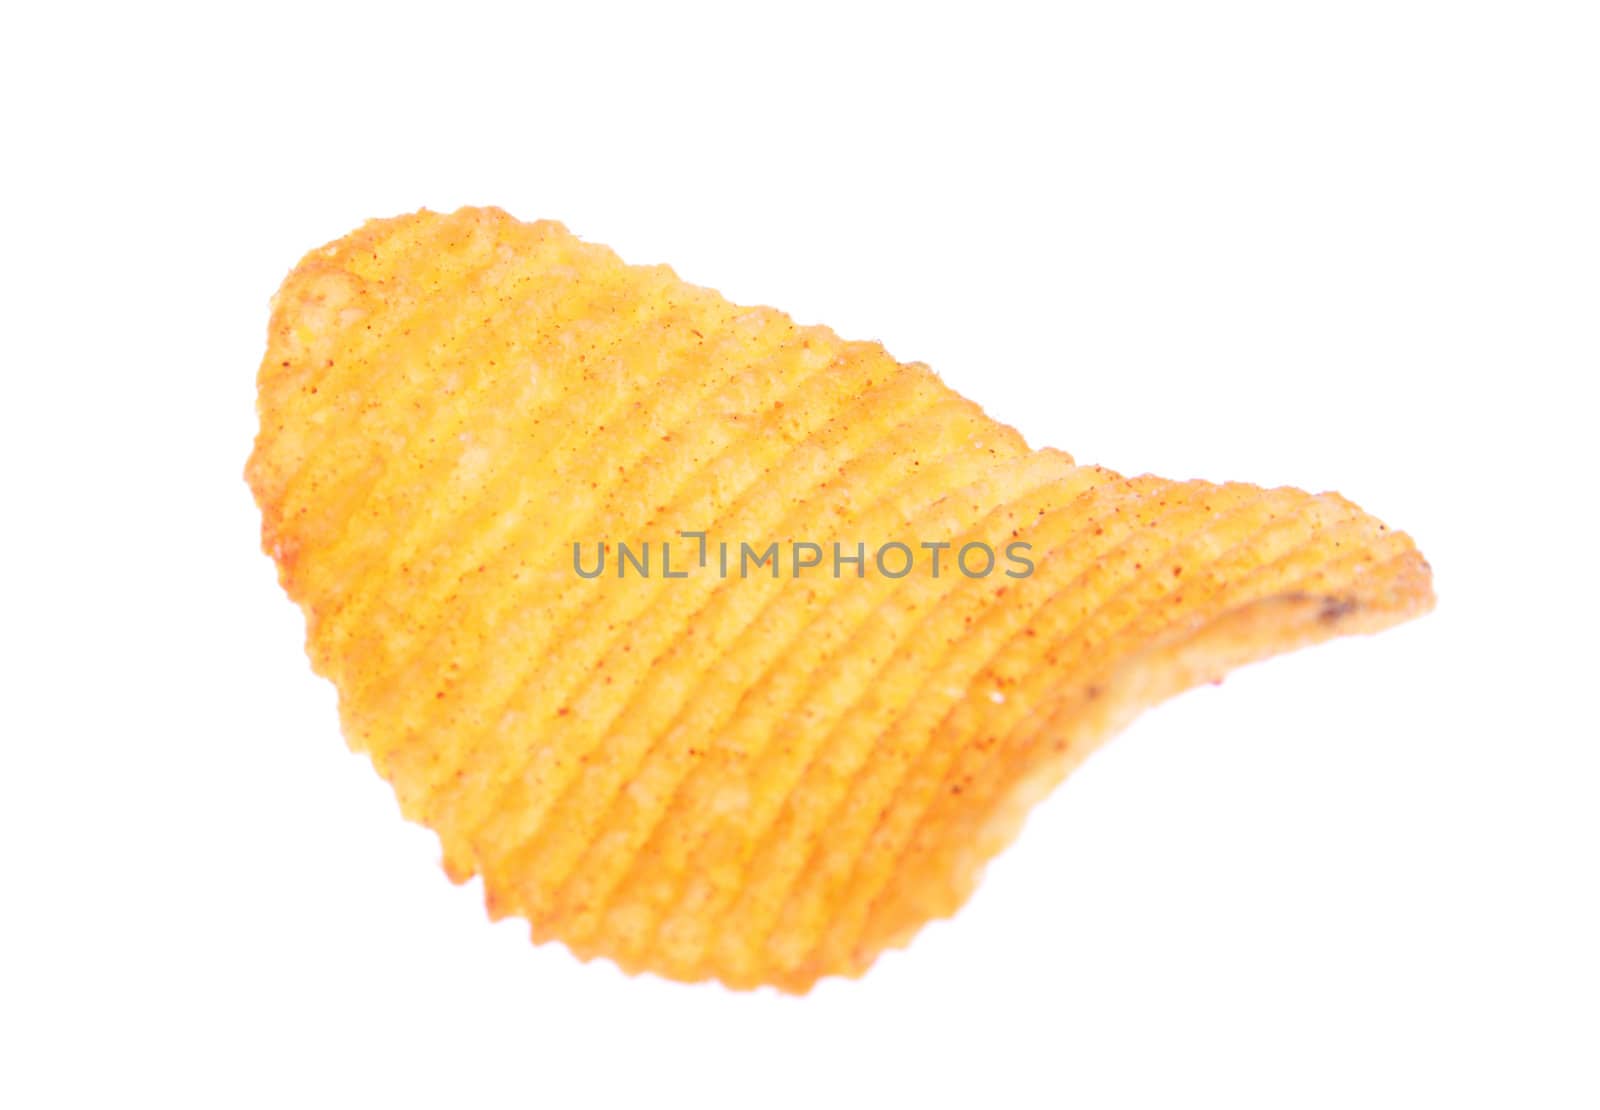 slice of potato chips by aguirre_mar